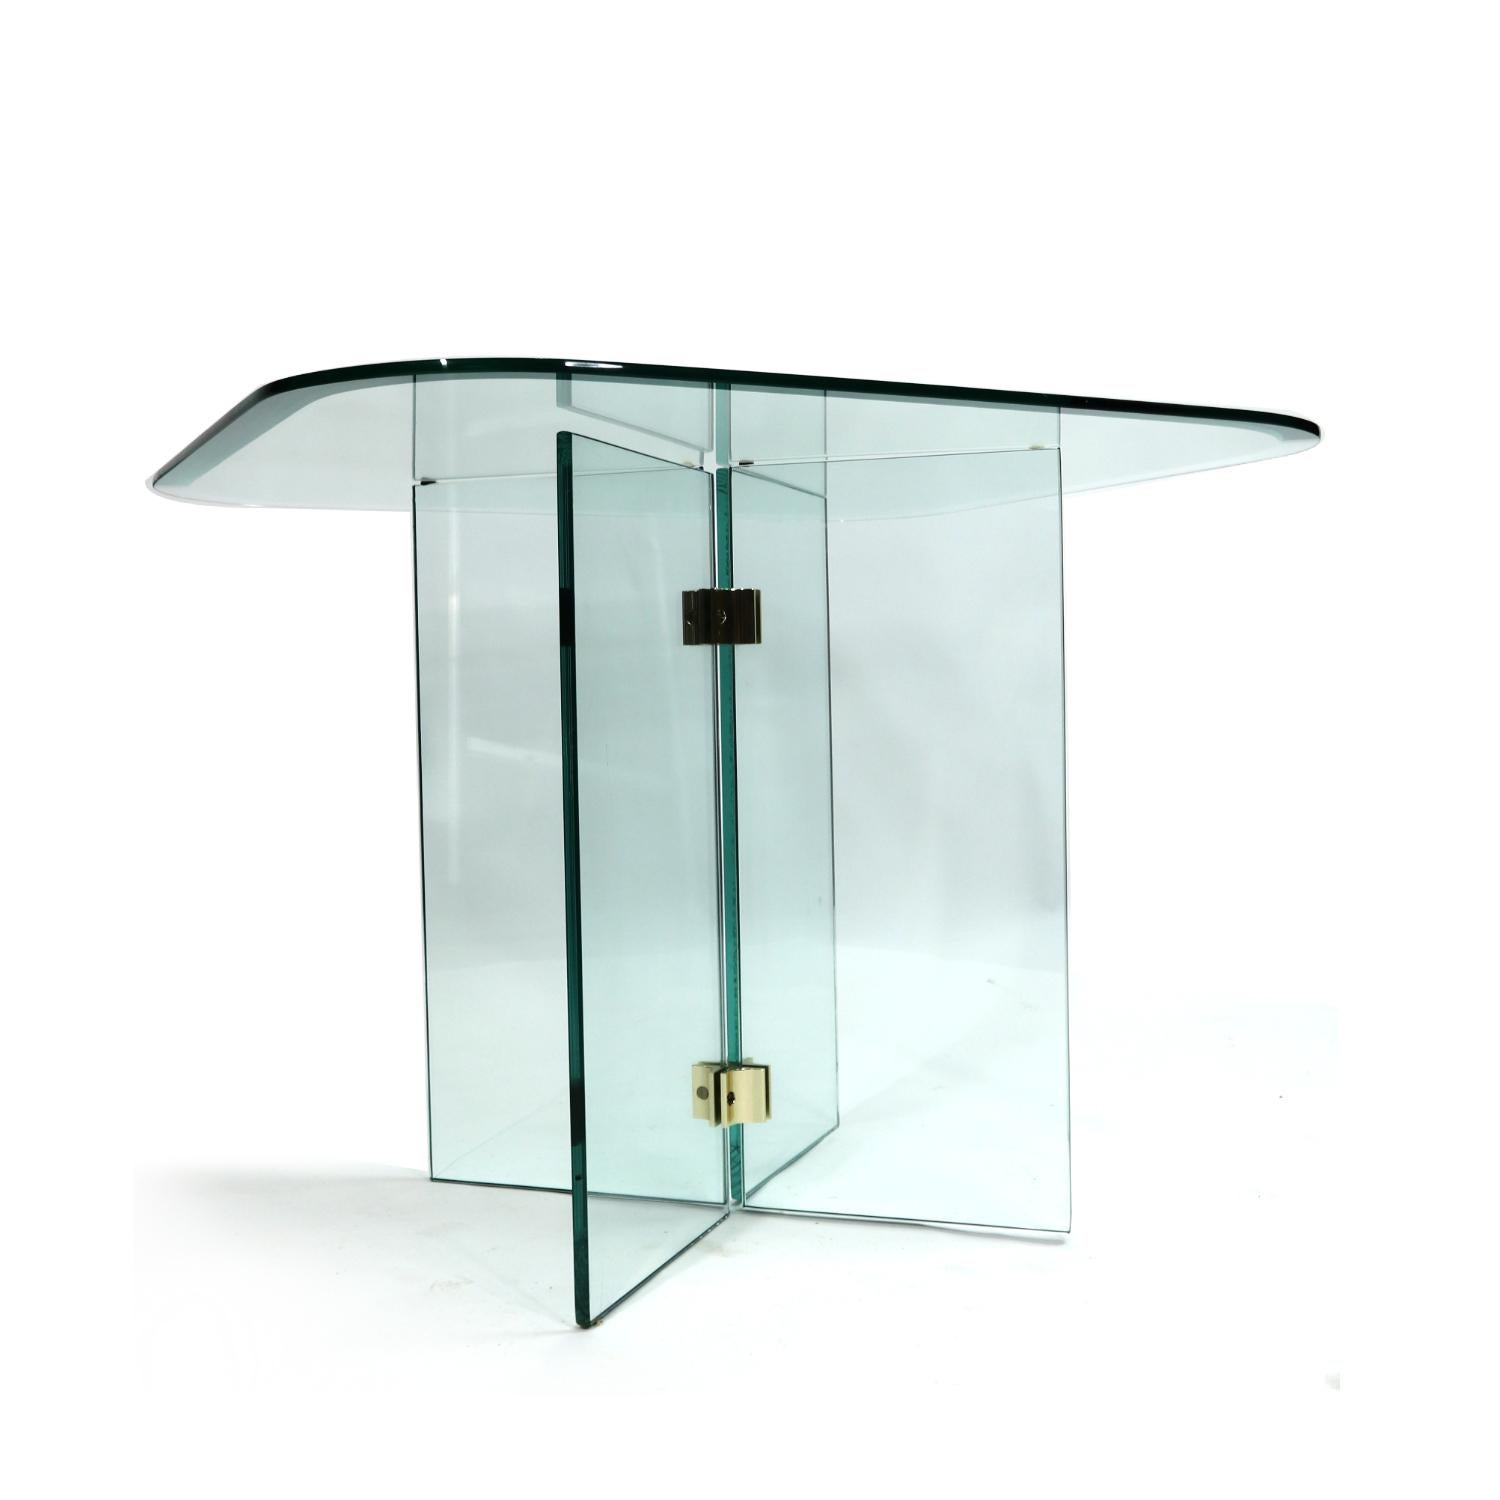 Leon Rosen for Pace Collection square side table with beveled, rounded top glass. The base is formed from thick panels of glass joined by gorgeous brass hardware, signature to Pace. The minimalist table is enhanced only by premium materials and